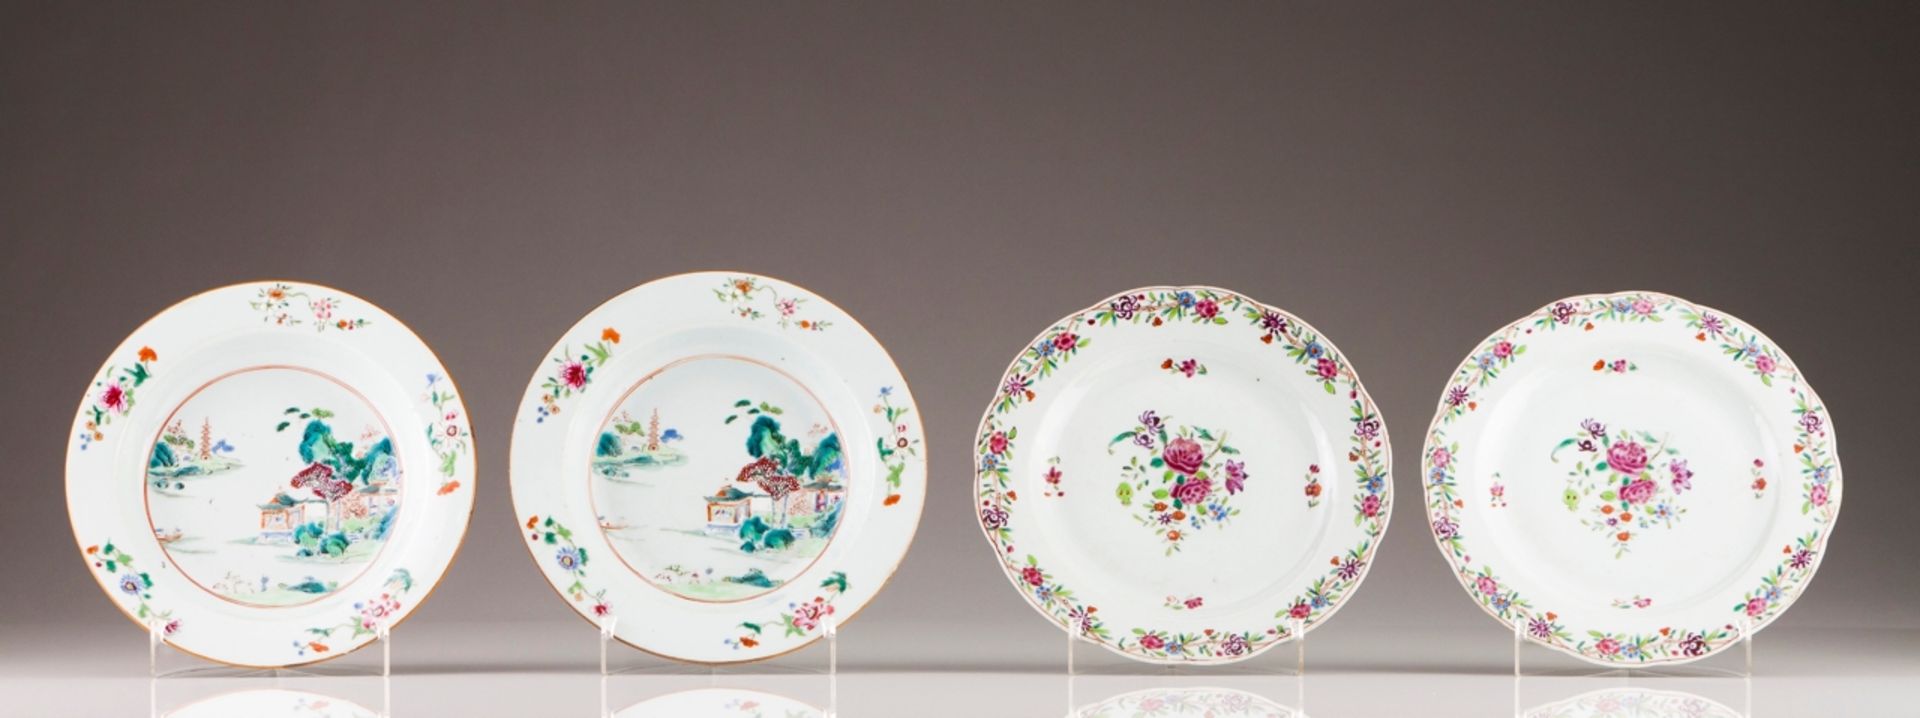 A pair of Qianlong plates
Chinese export porcelain
Polychrome decoration with flowers
Qianlong